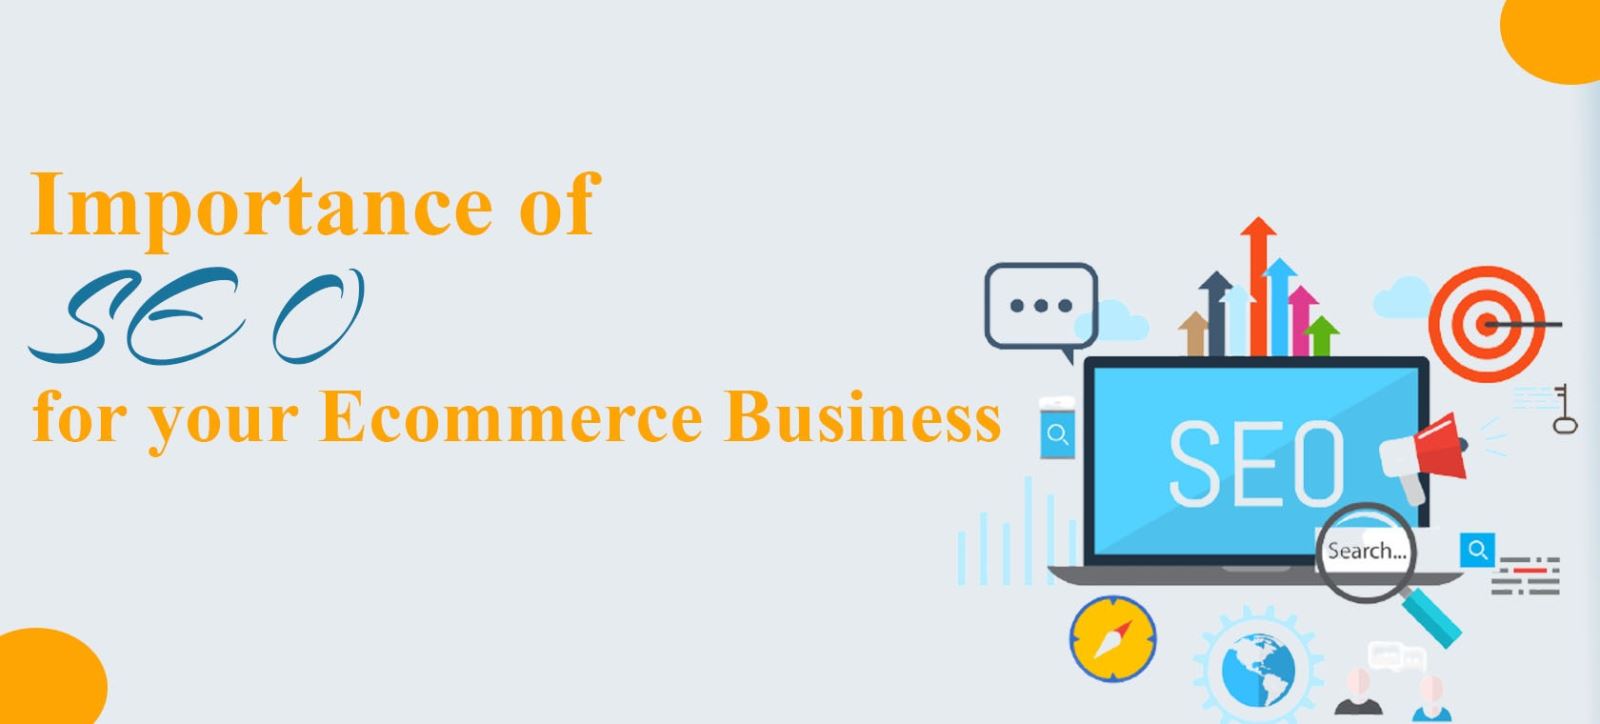 Importance of SEO in Ecommerce Business | DukanLay Blogs